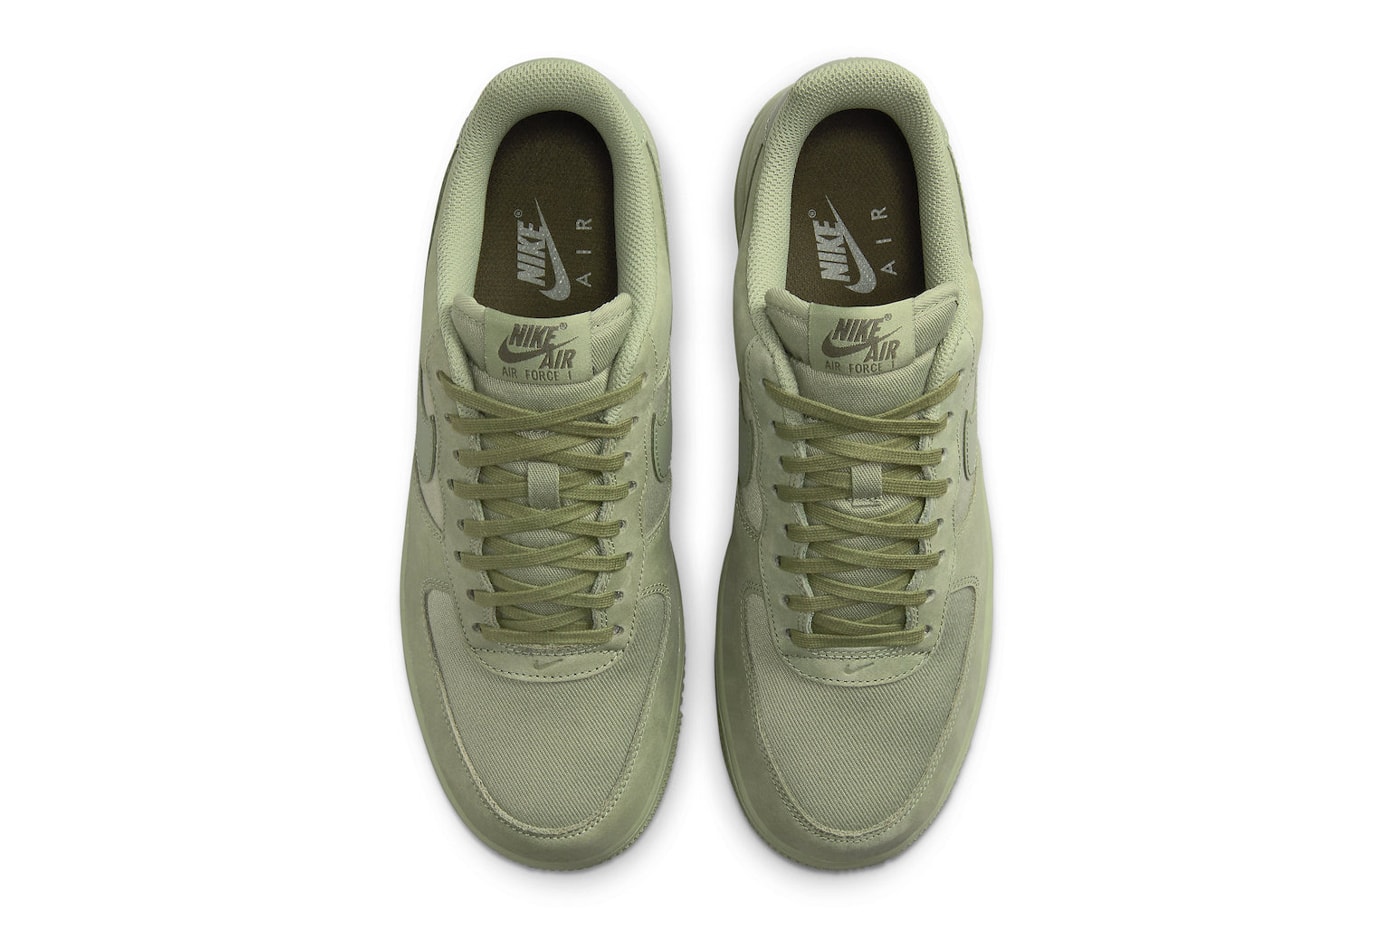 Official Look at the Nike Air Force One Low Premium "Oil Green"  FB8876-300 Oil Green/Oil Green-Cargo Khaki Release info af1 everyday sneakers suede twill